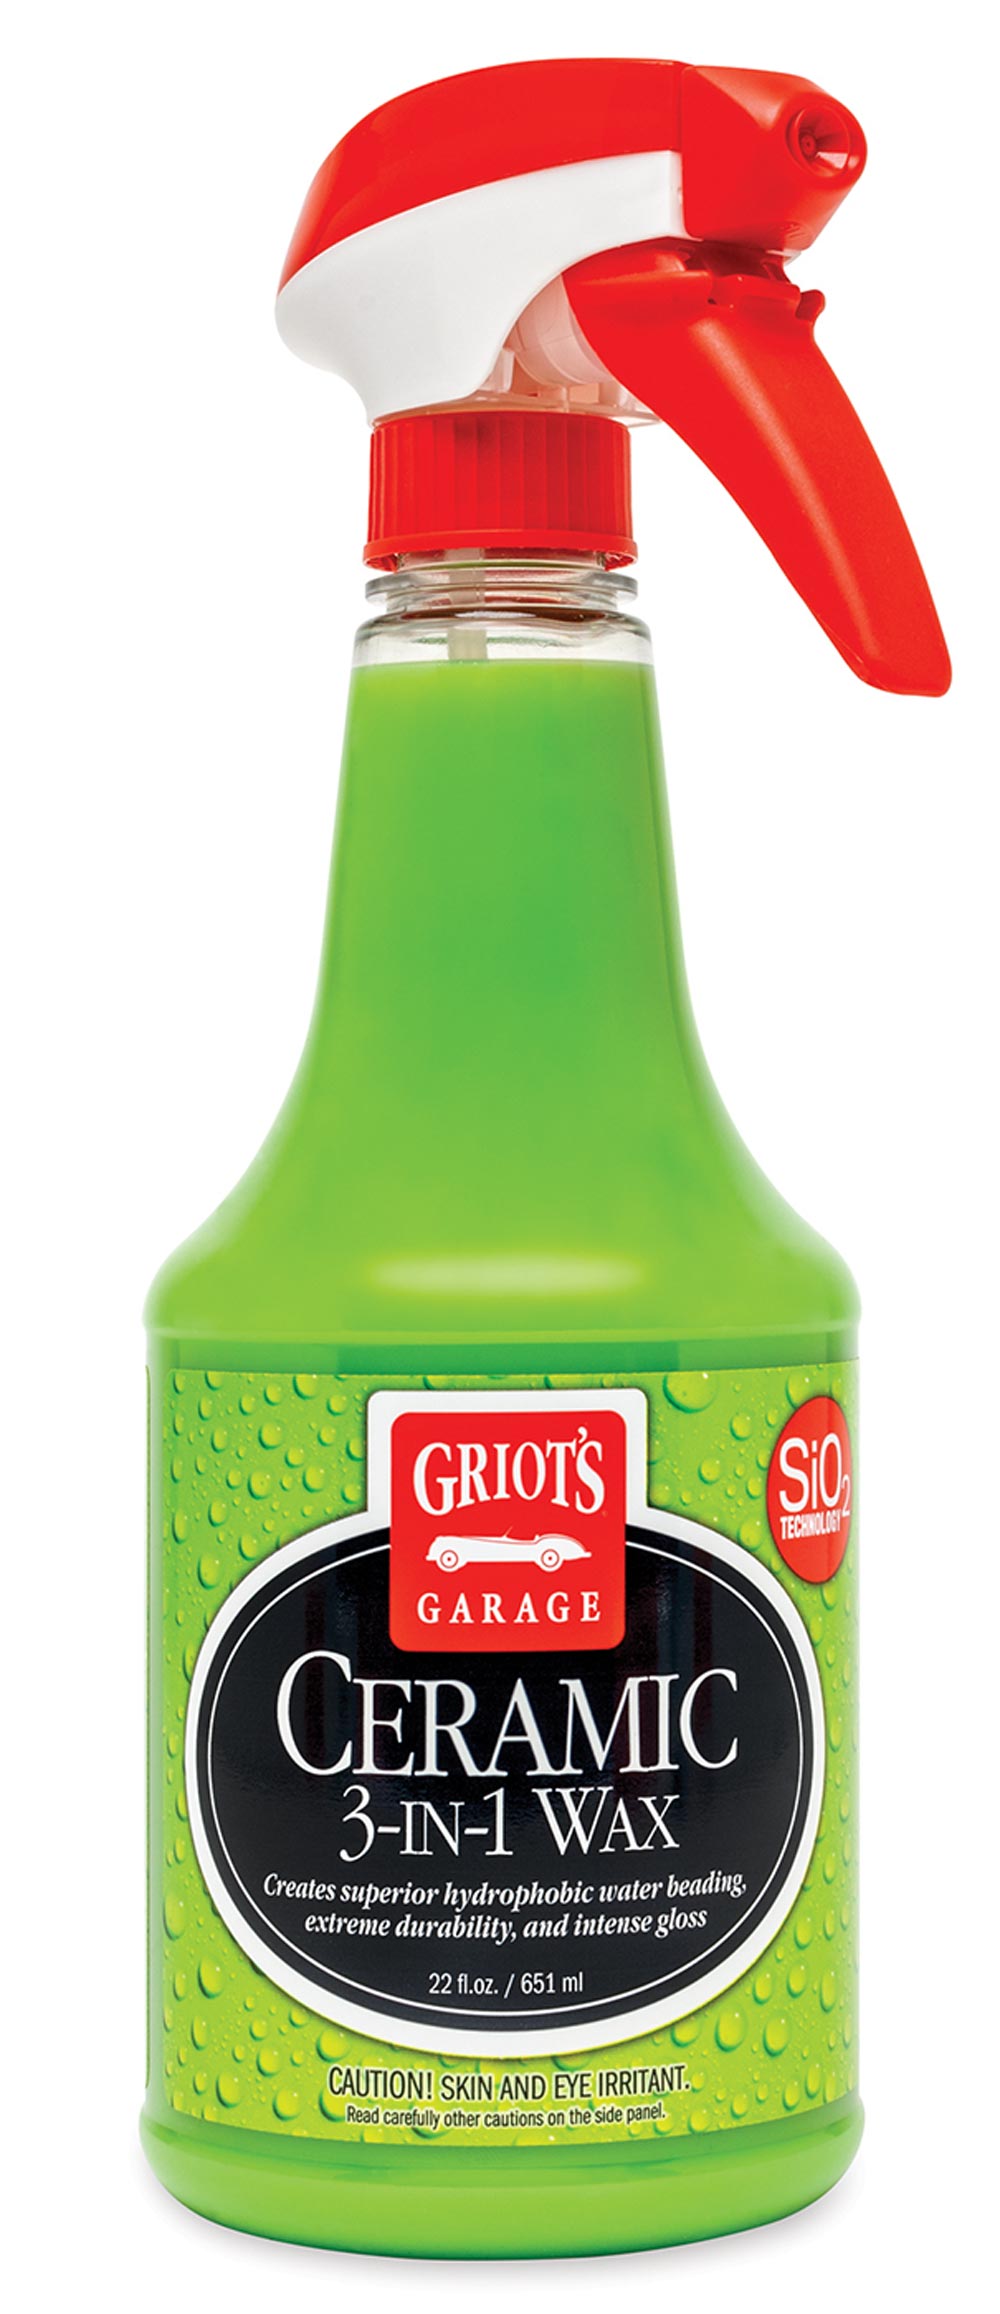 close view of a spray container of Griot’s ceramic 3-in-1 wax